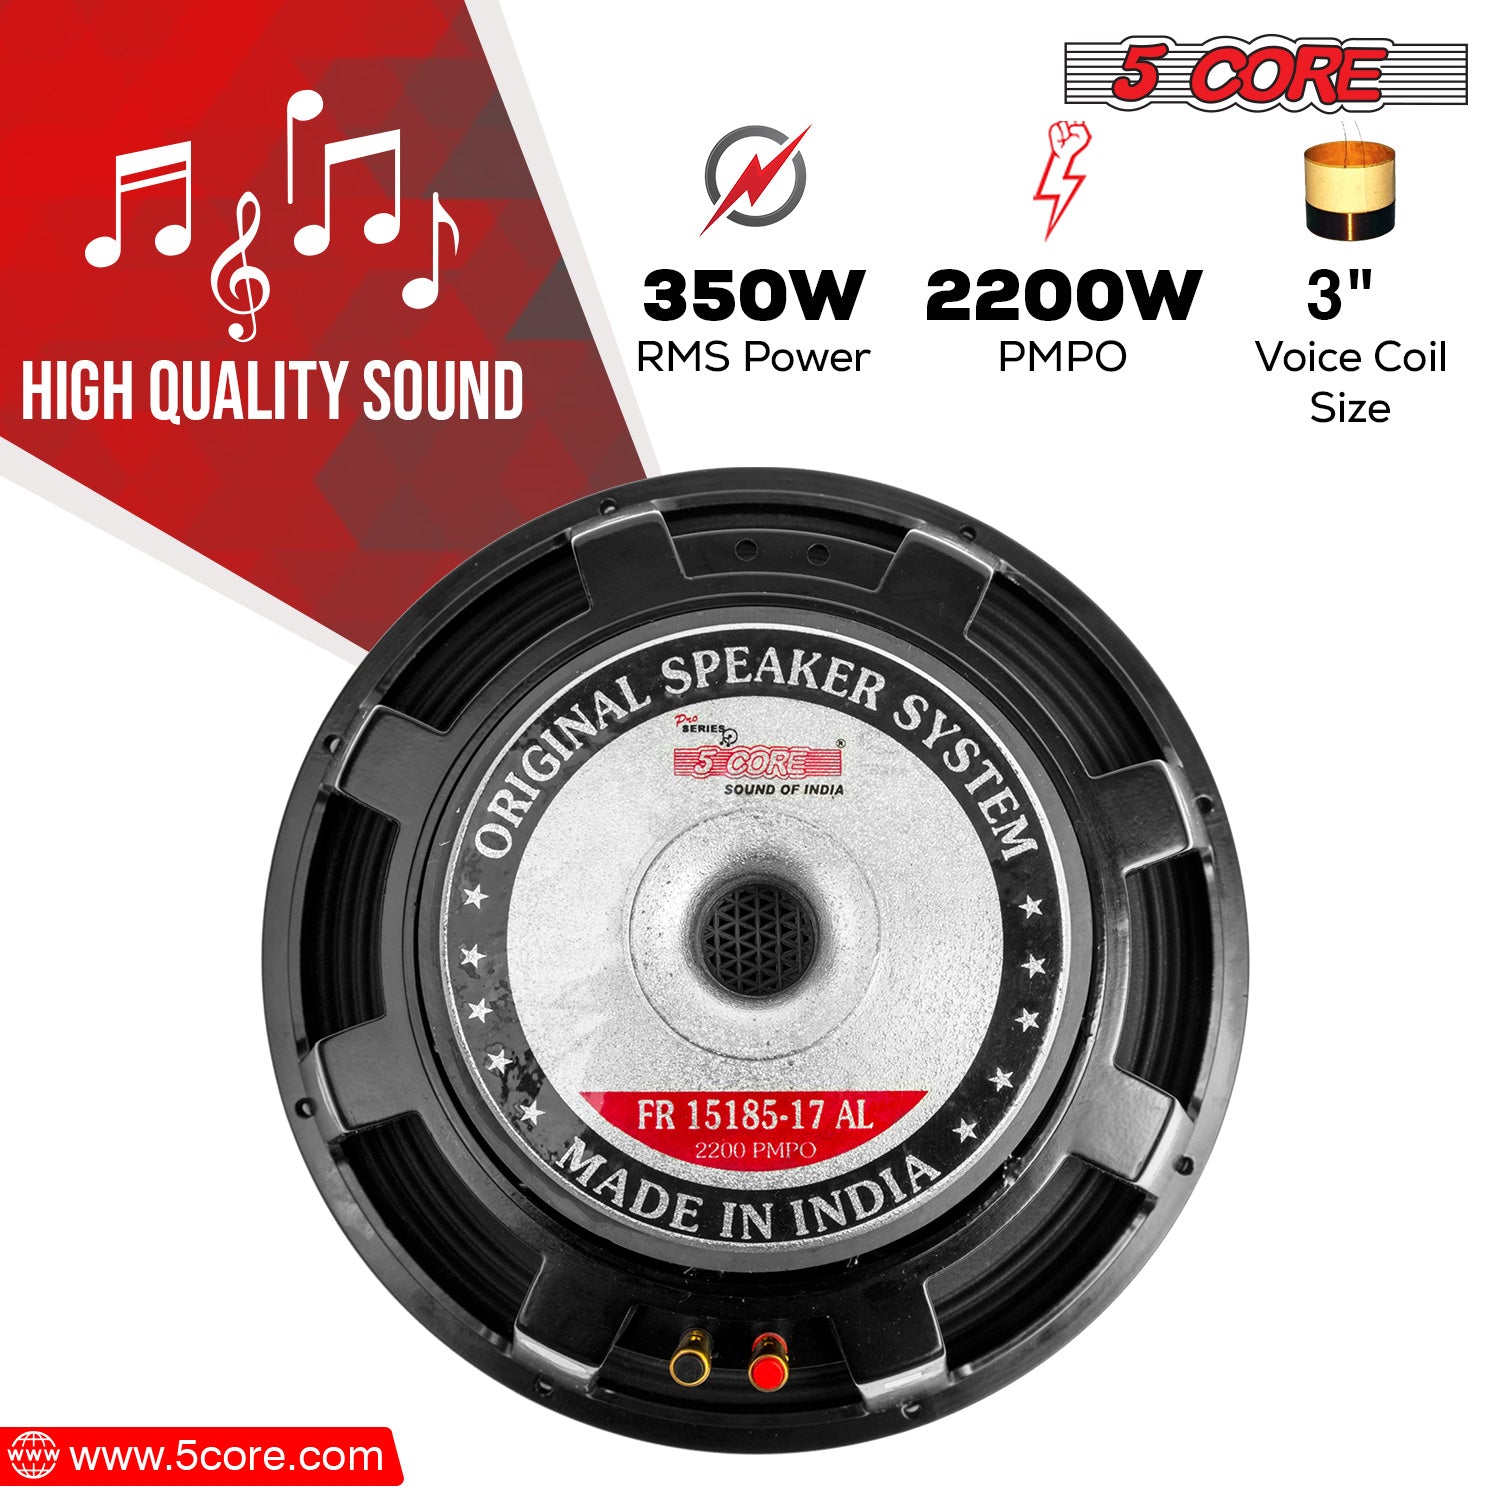 15 Inch Speaker 350W RMS delivers a rich and immersive sound experience